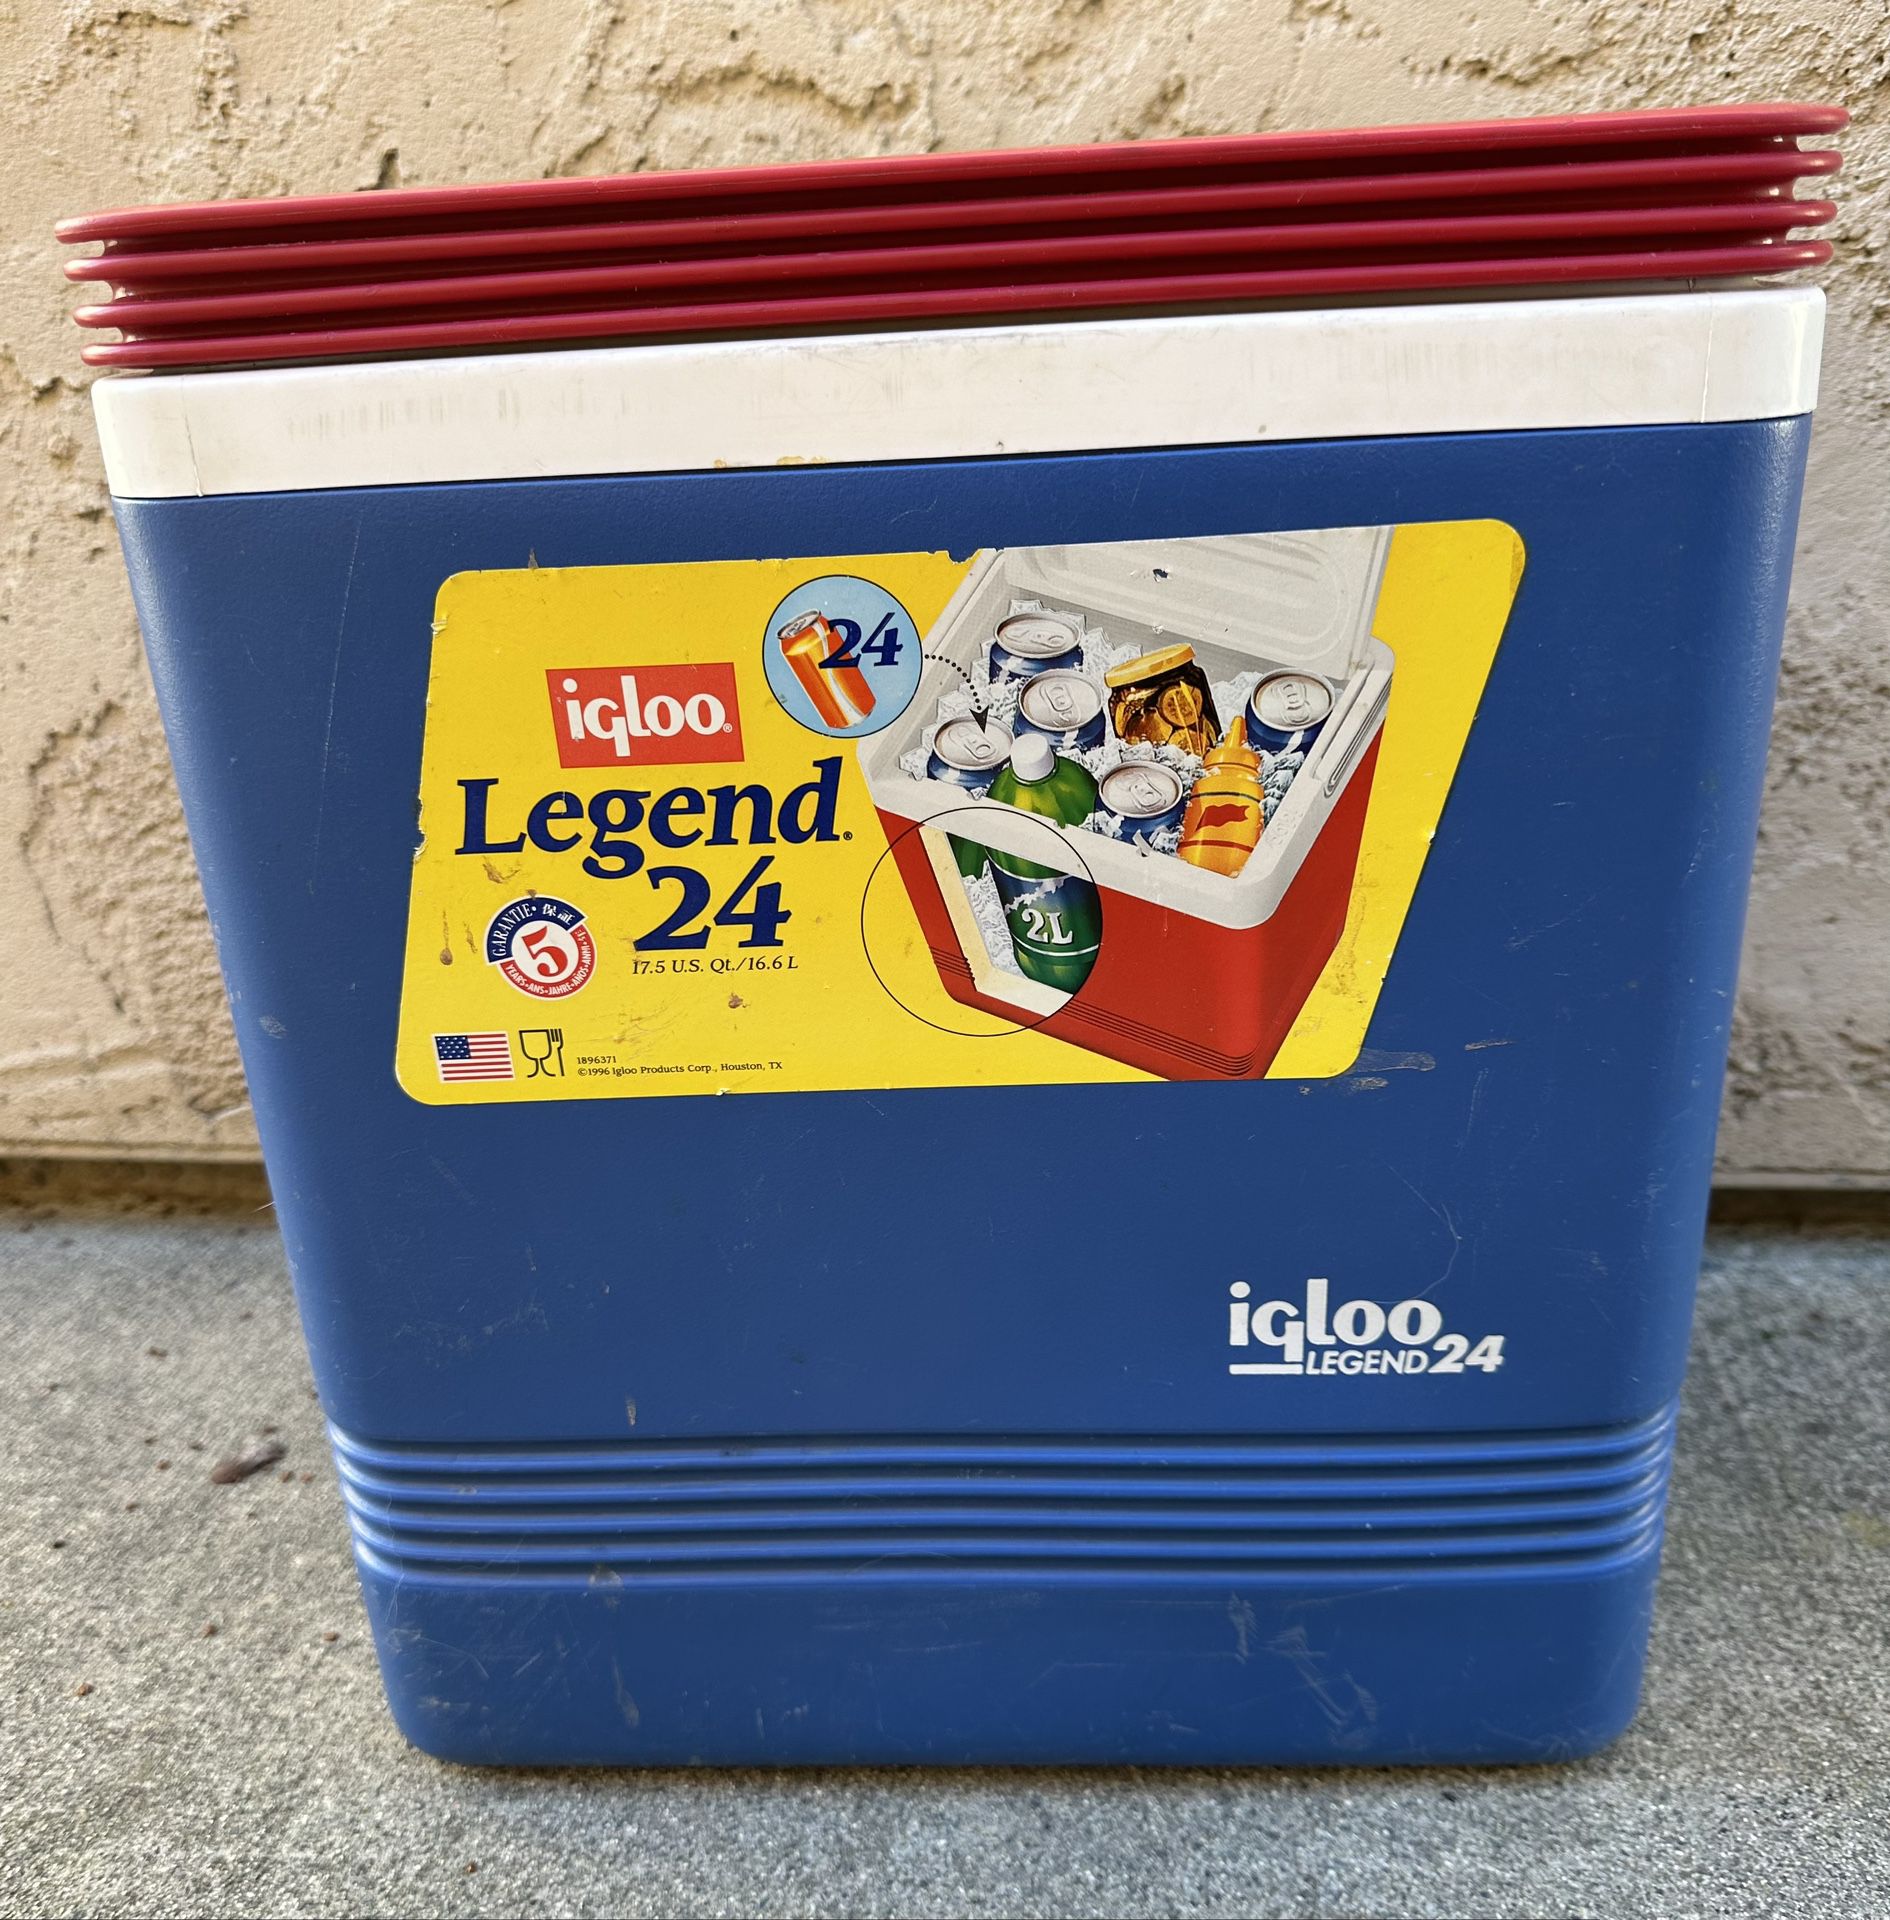 Igloo Legend 24 Cooler blue and white with red handle